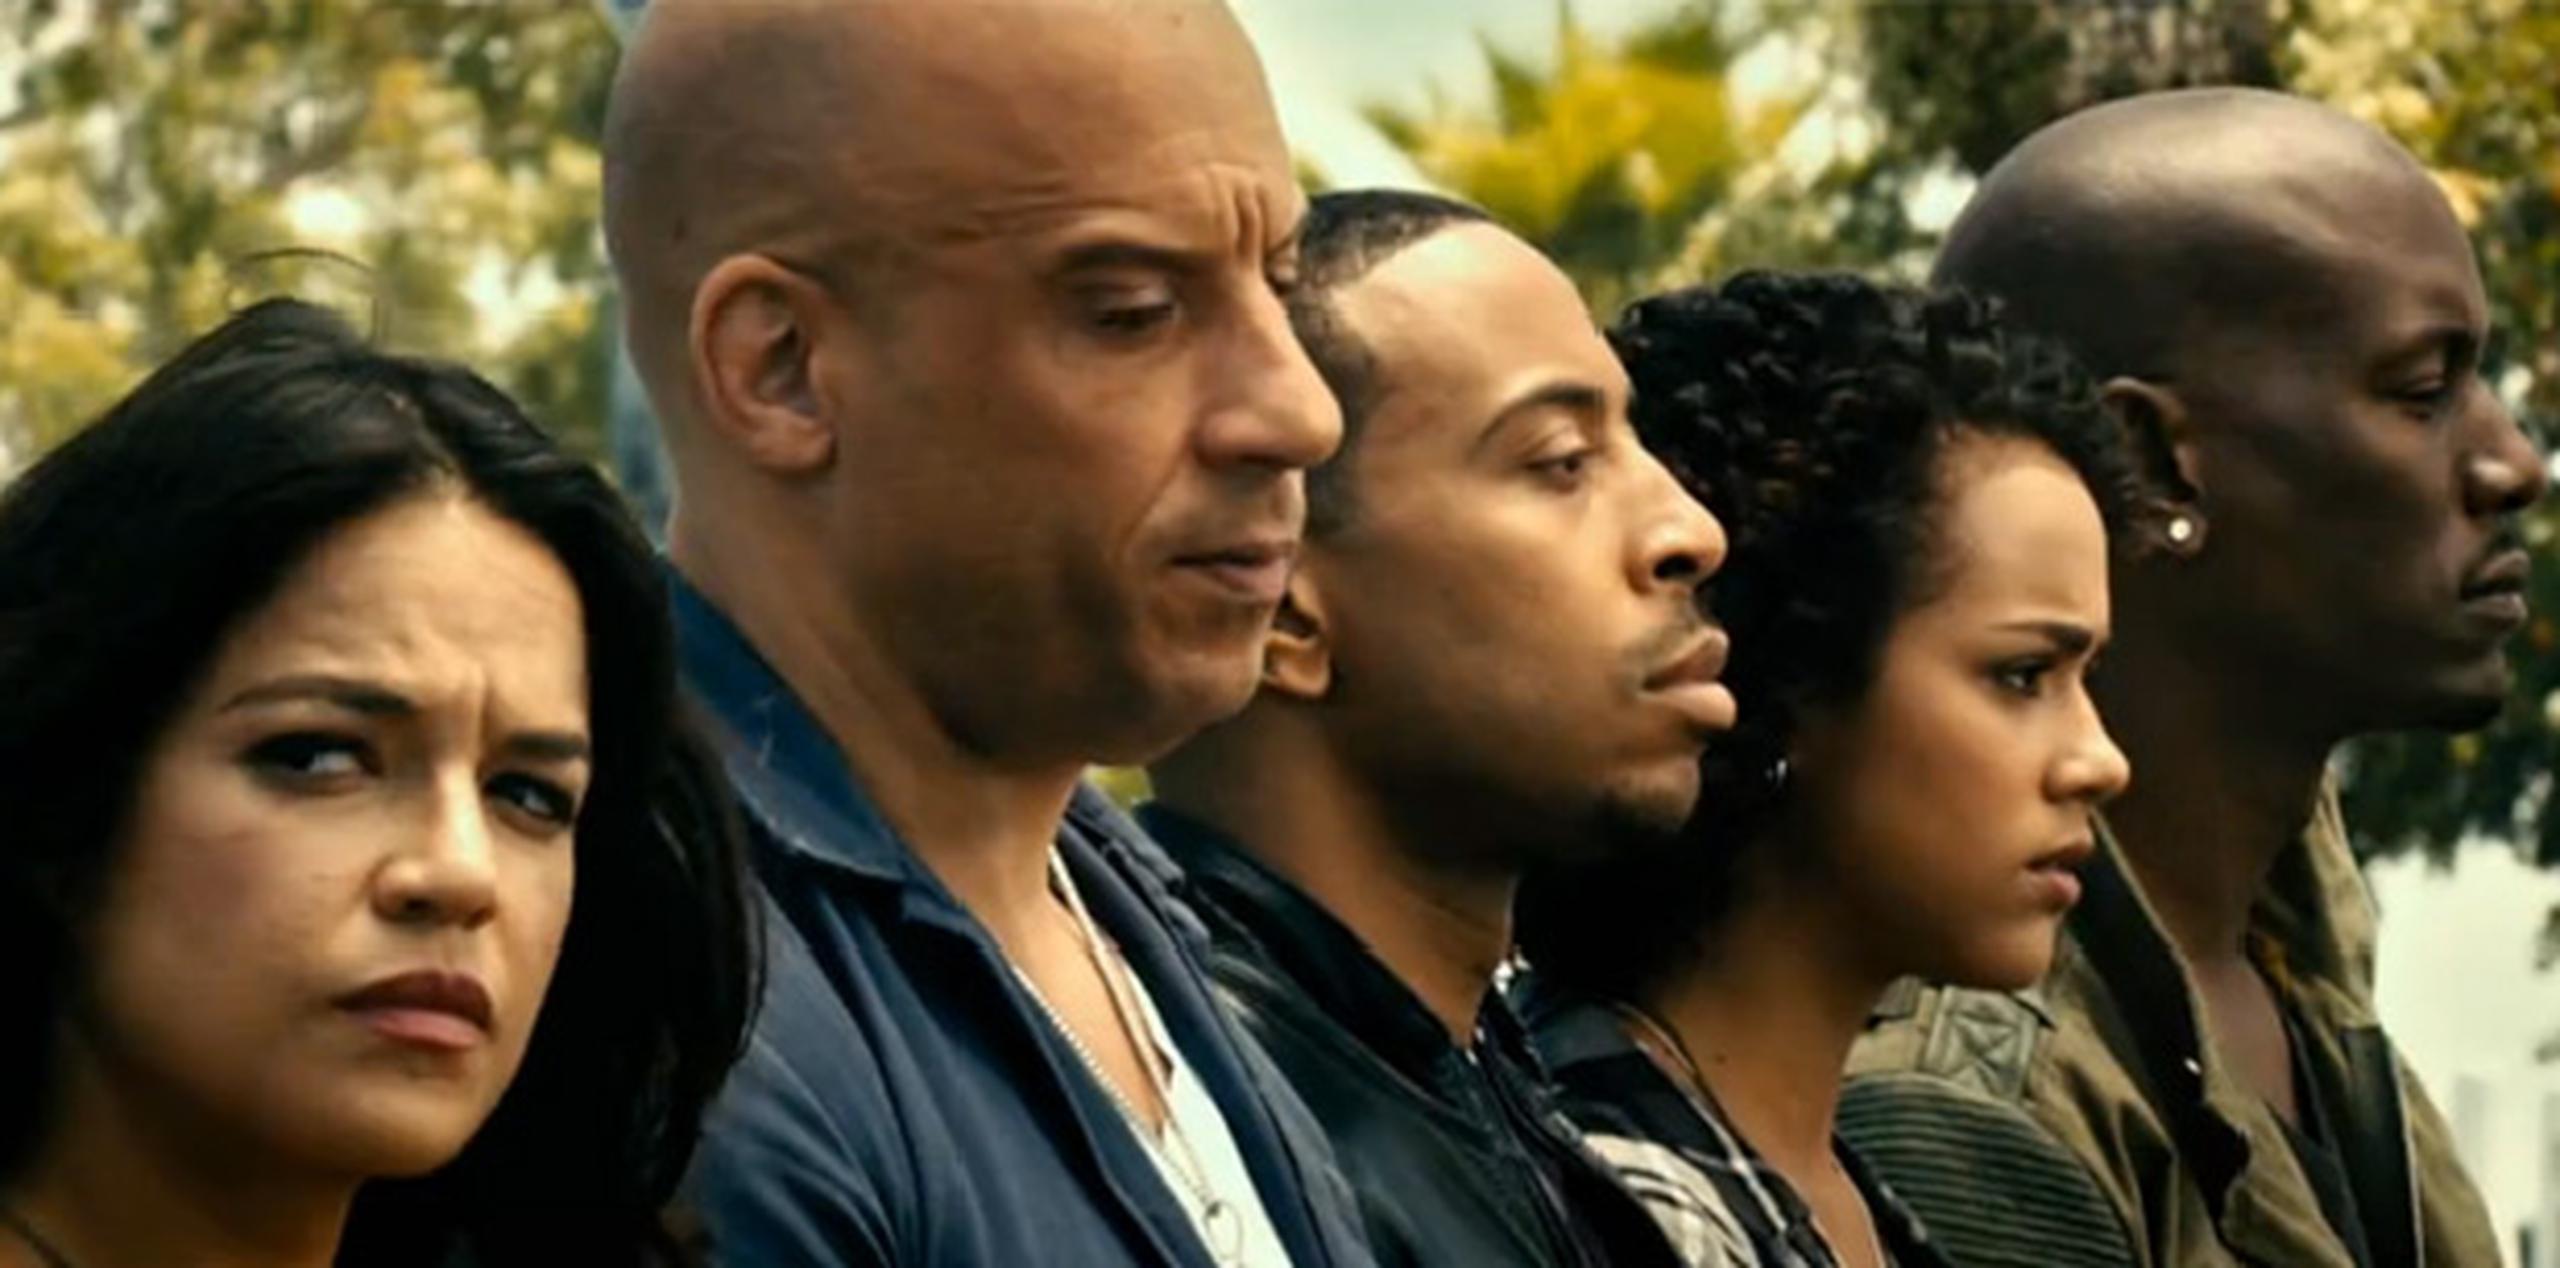 Fast & Furious 7 (Universal Pictures)